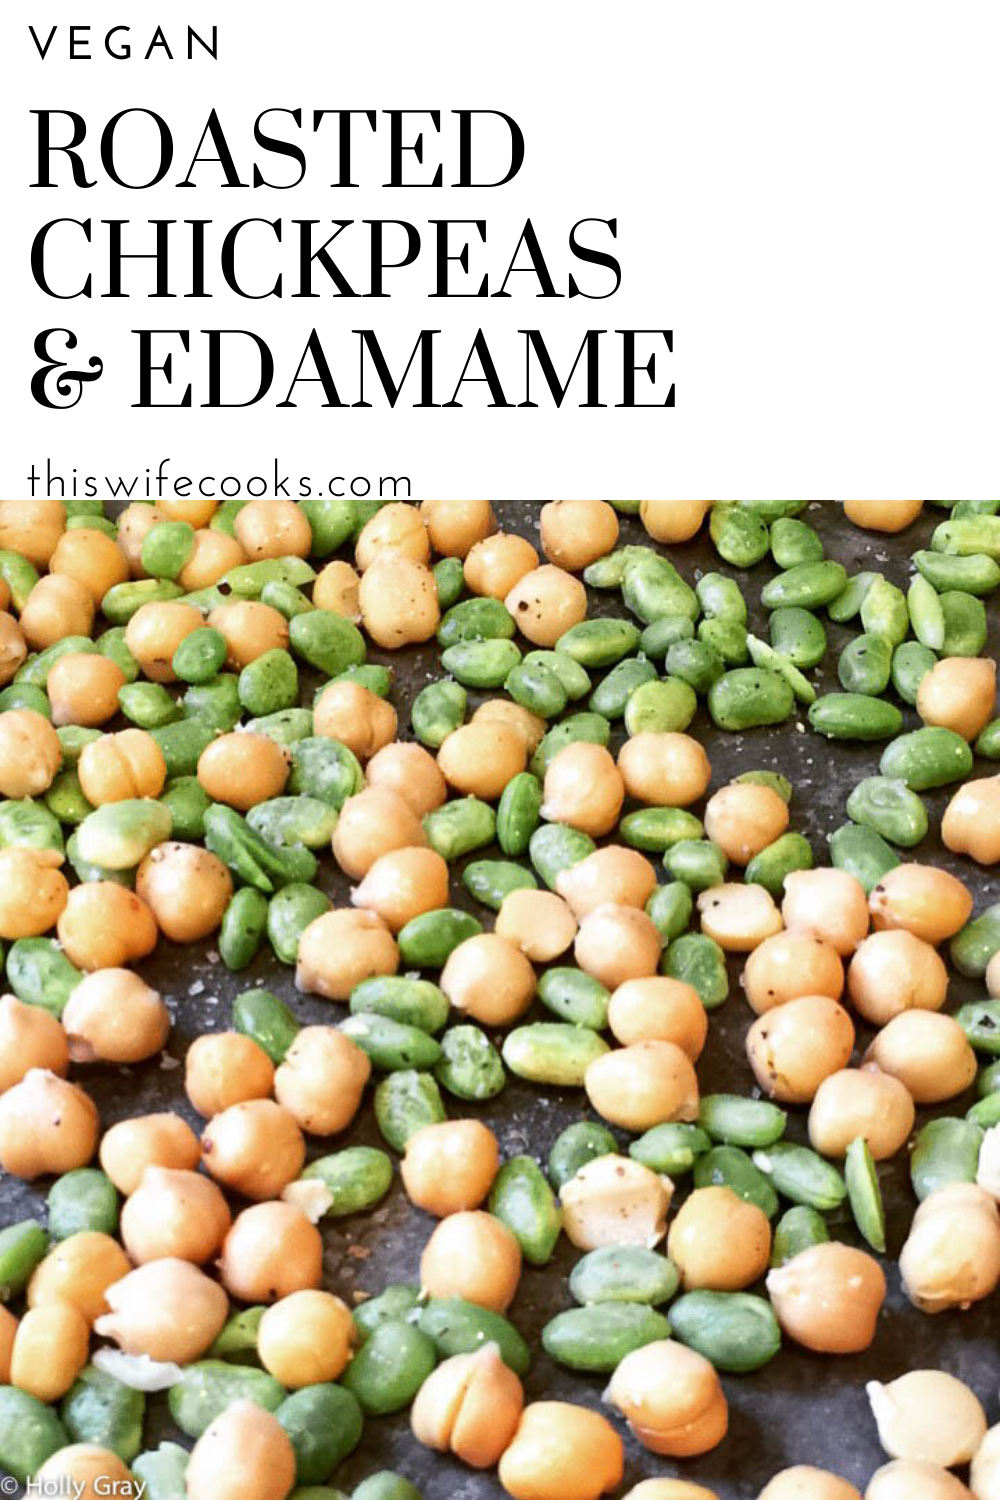 Roasted Chickpeas and Edamame - Loaded with protein and easy to customize with all sorts of seasonings to suit your personal taste. via @thiswifecooks